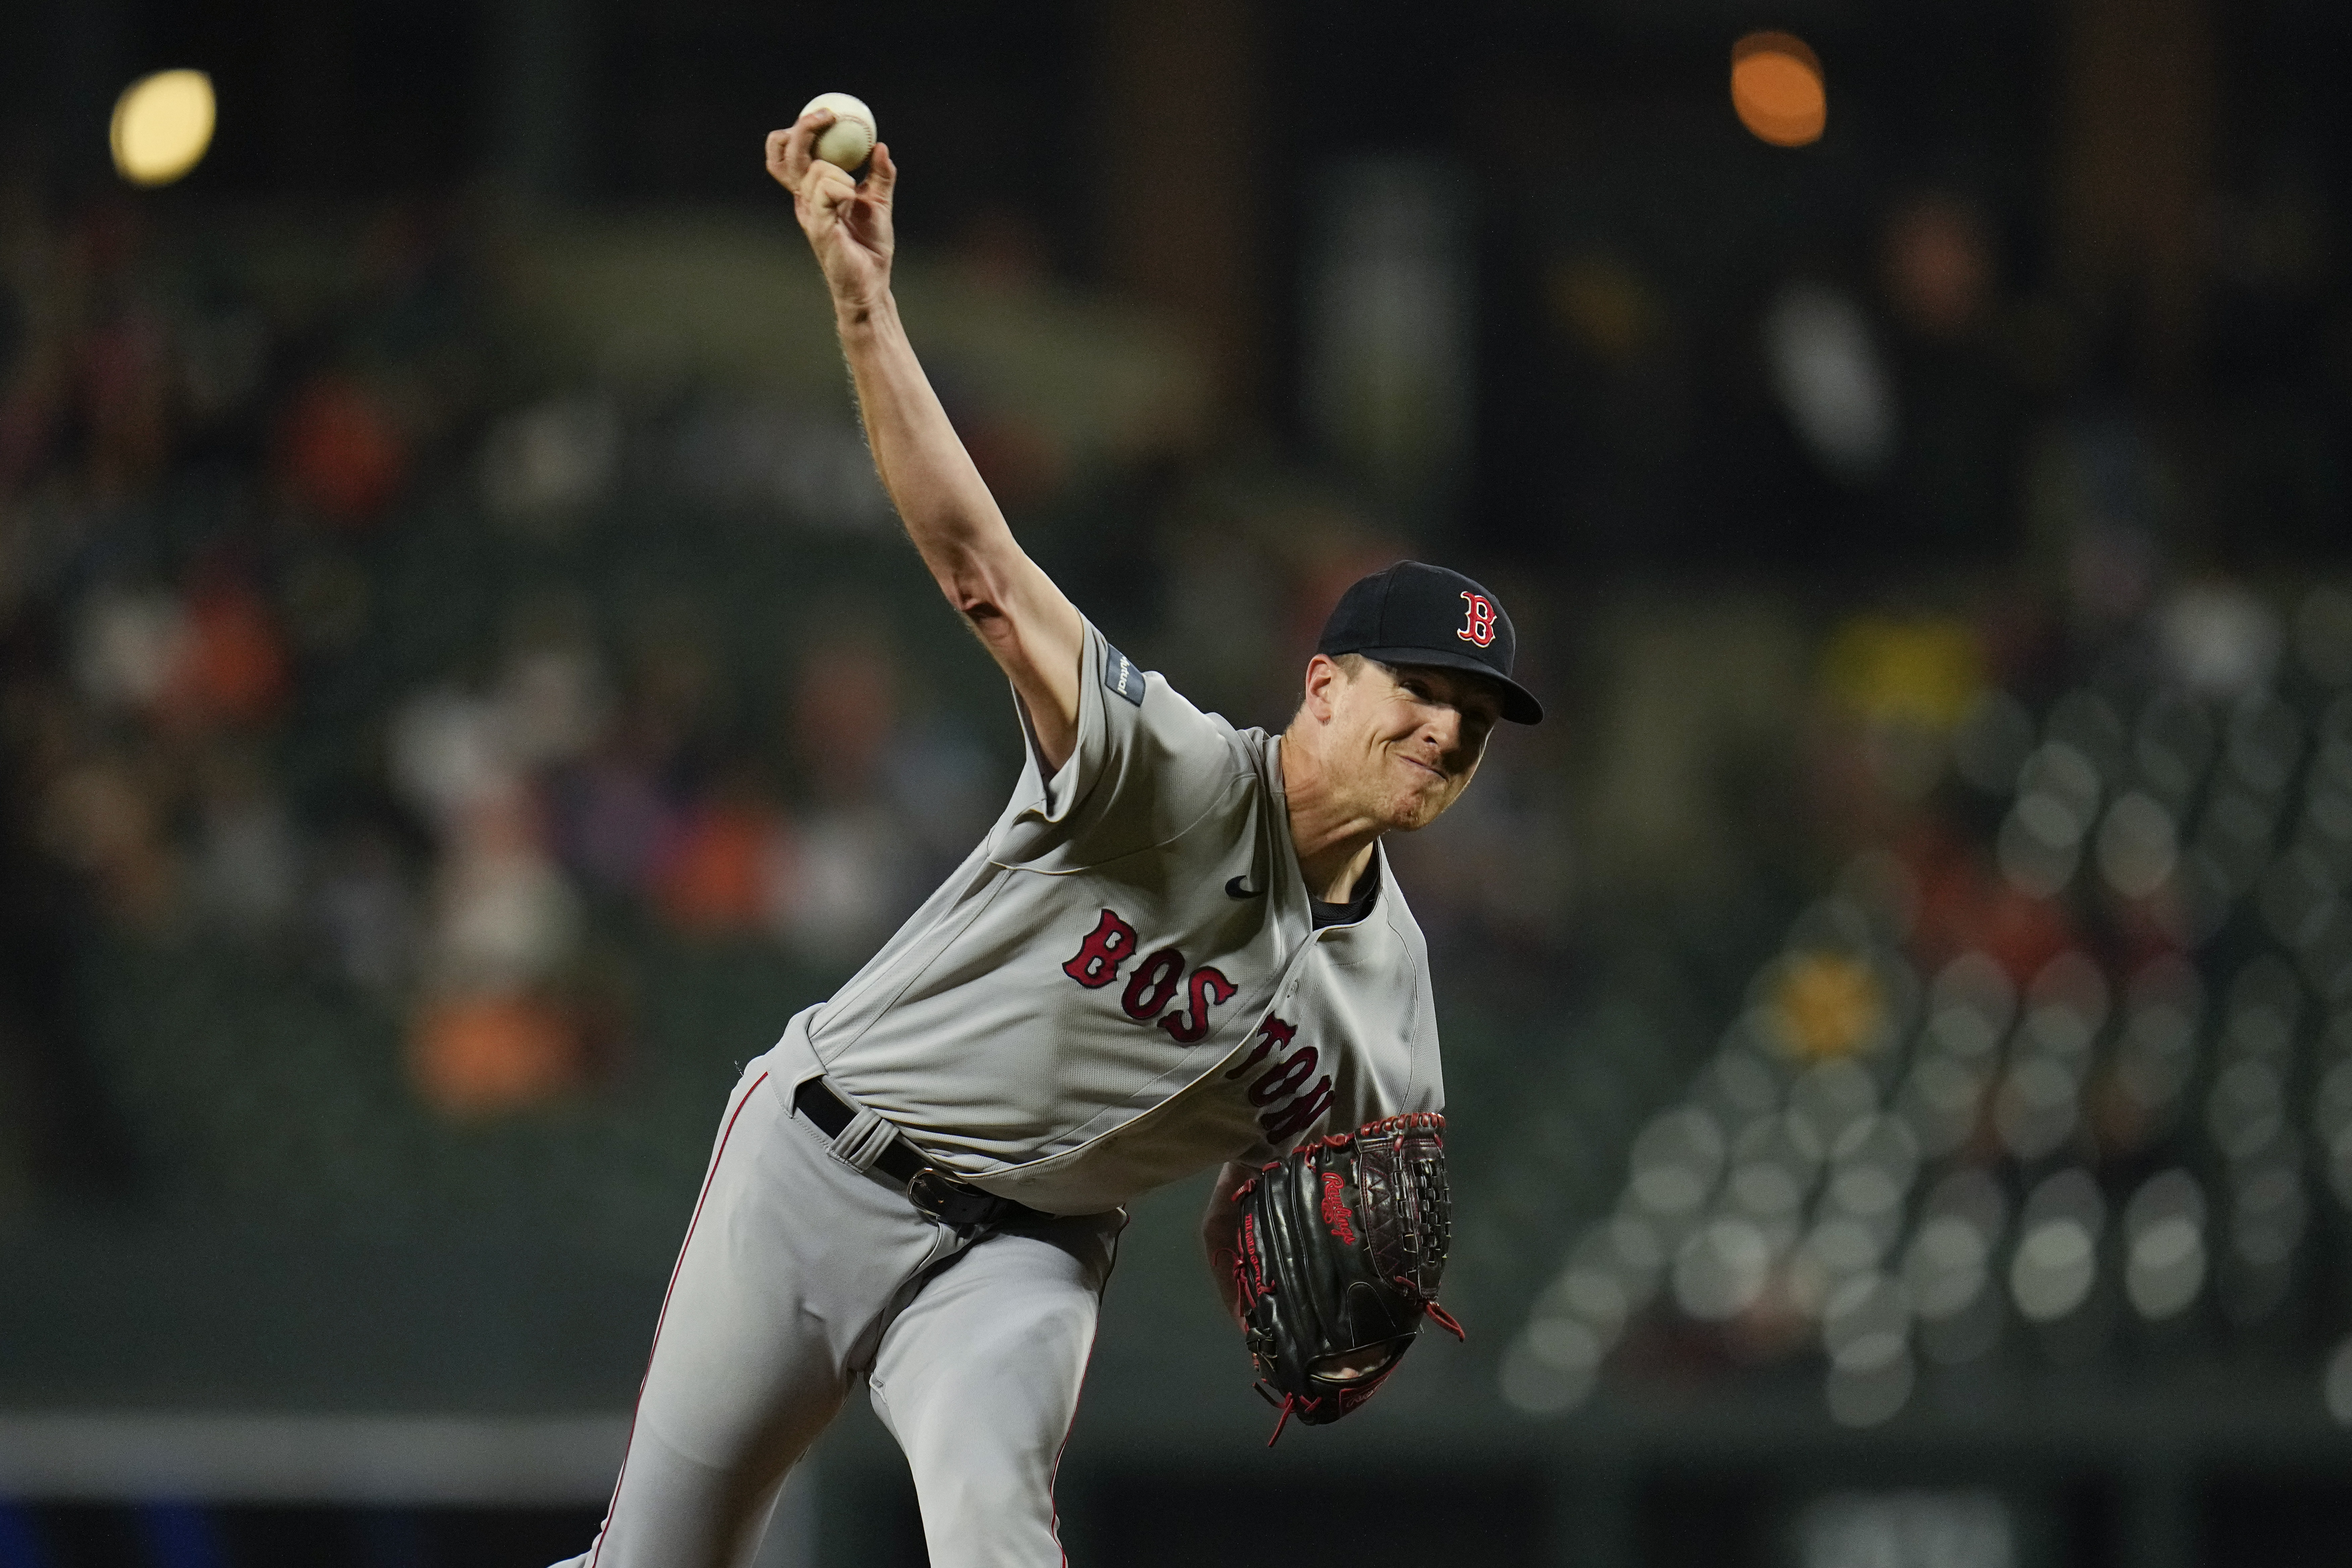 Nick Pivetta lasts just 2 innings as Boston Red Sox drop home